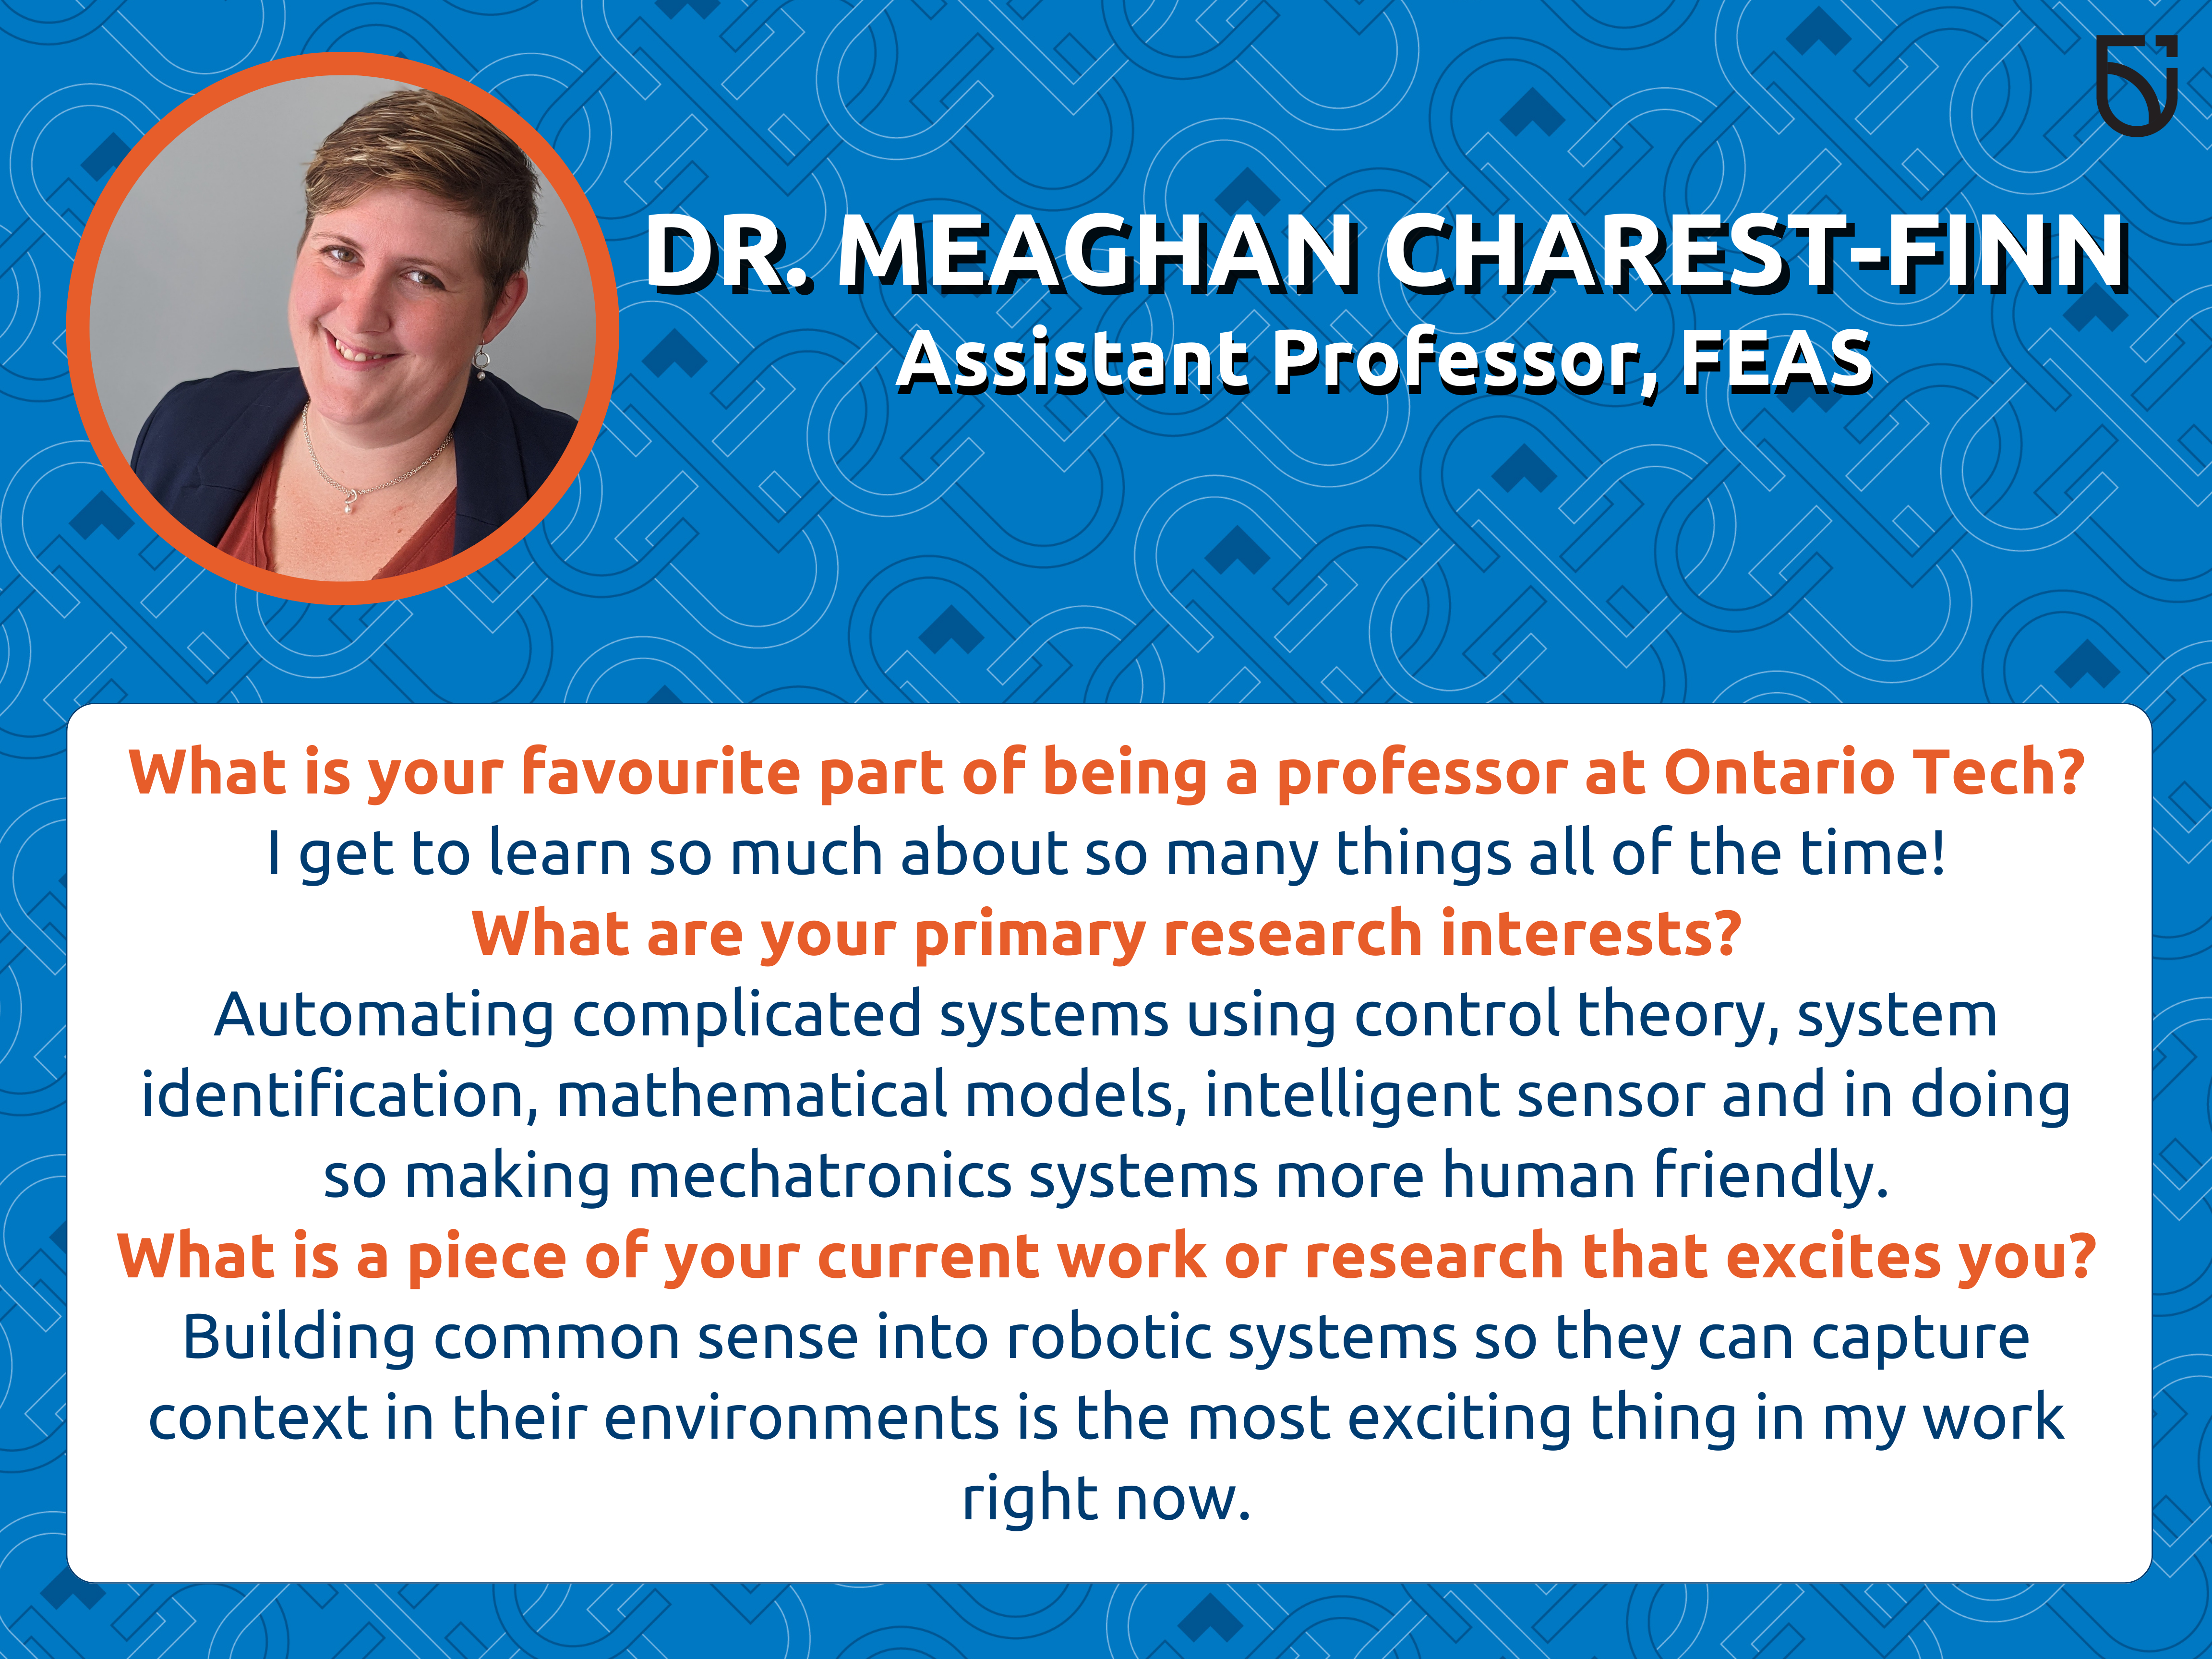 This photo is a Women’s Wednesday feature of Dr. Meaghan Charest-Finn, an Assistant Professor in the Faculty of Engineering and Applied Science